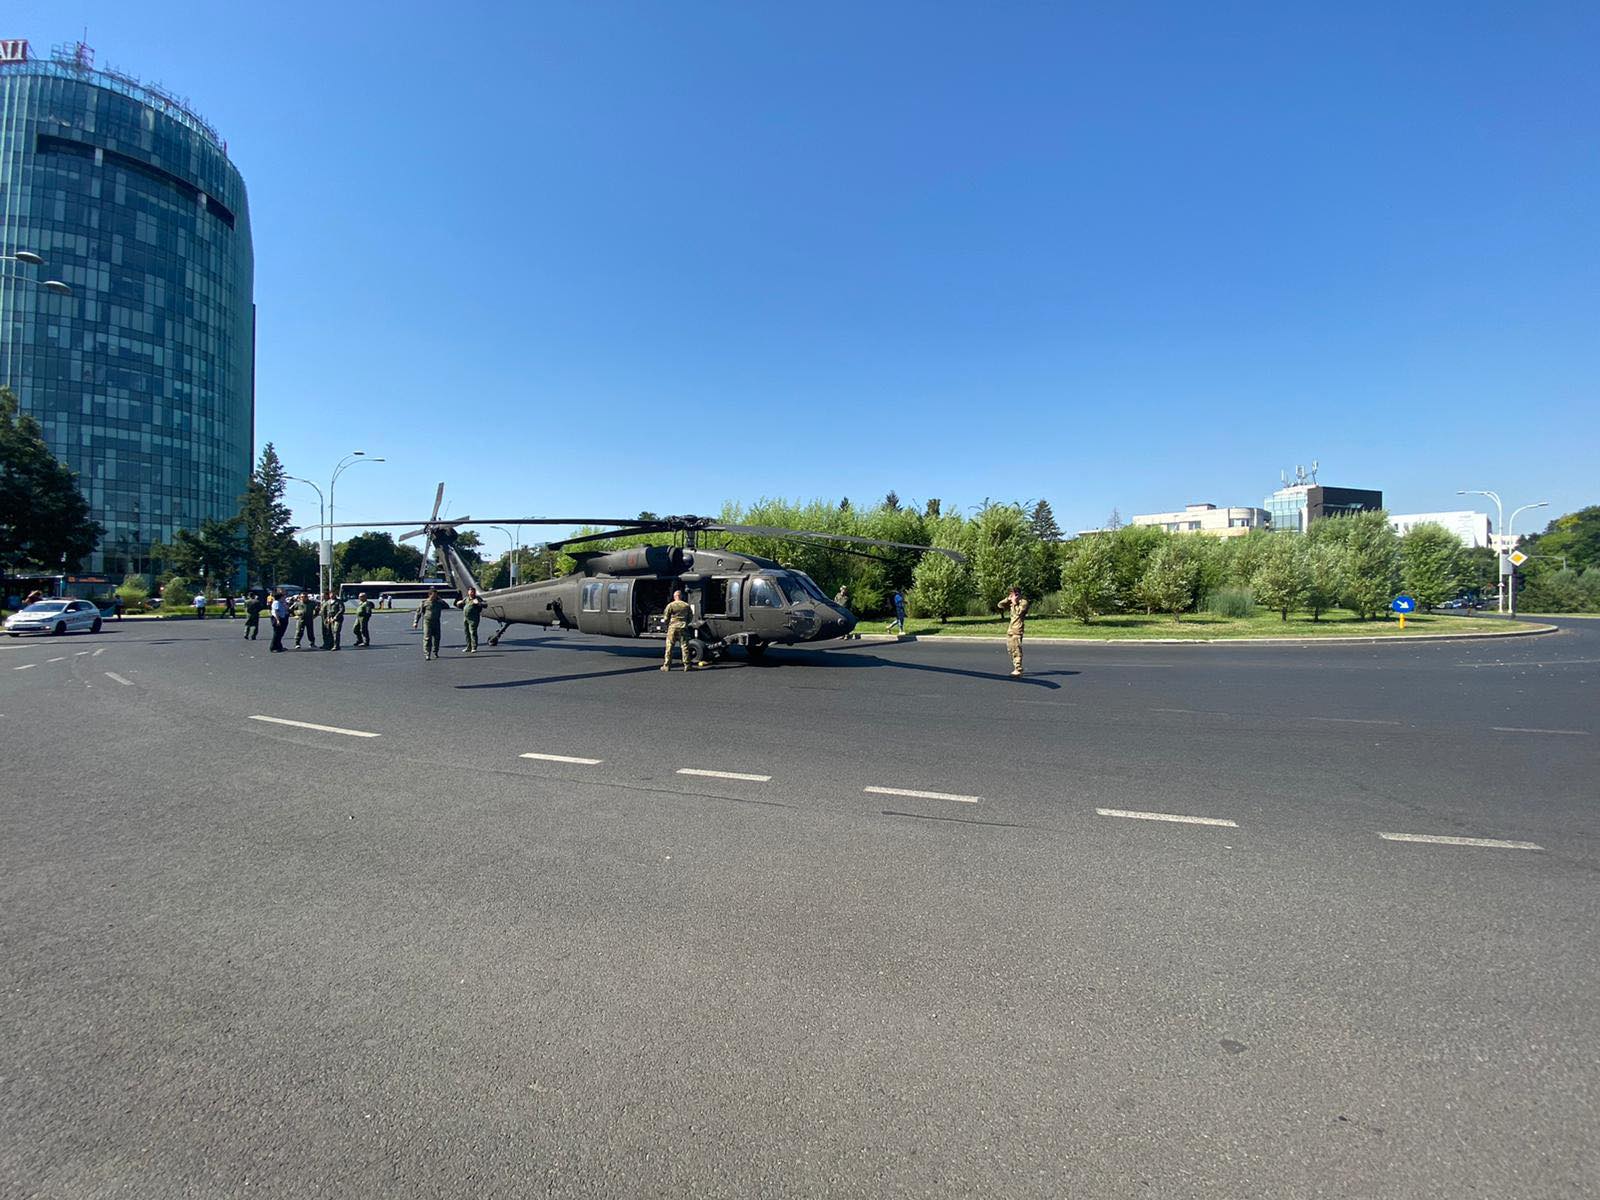 A military Black Hawk helicopter made an emergency landing in busy boulevard in the Charles de Gaulle Square in northern Bucharest on Thursday July 15, 2021 morning, stopping traffic and knocking down two light poles but no injuries were reported